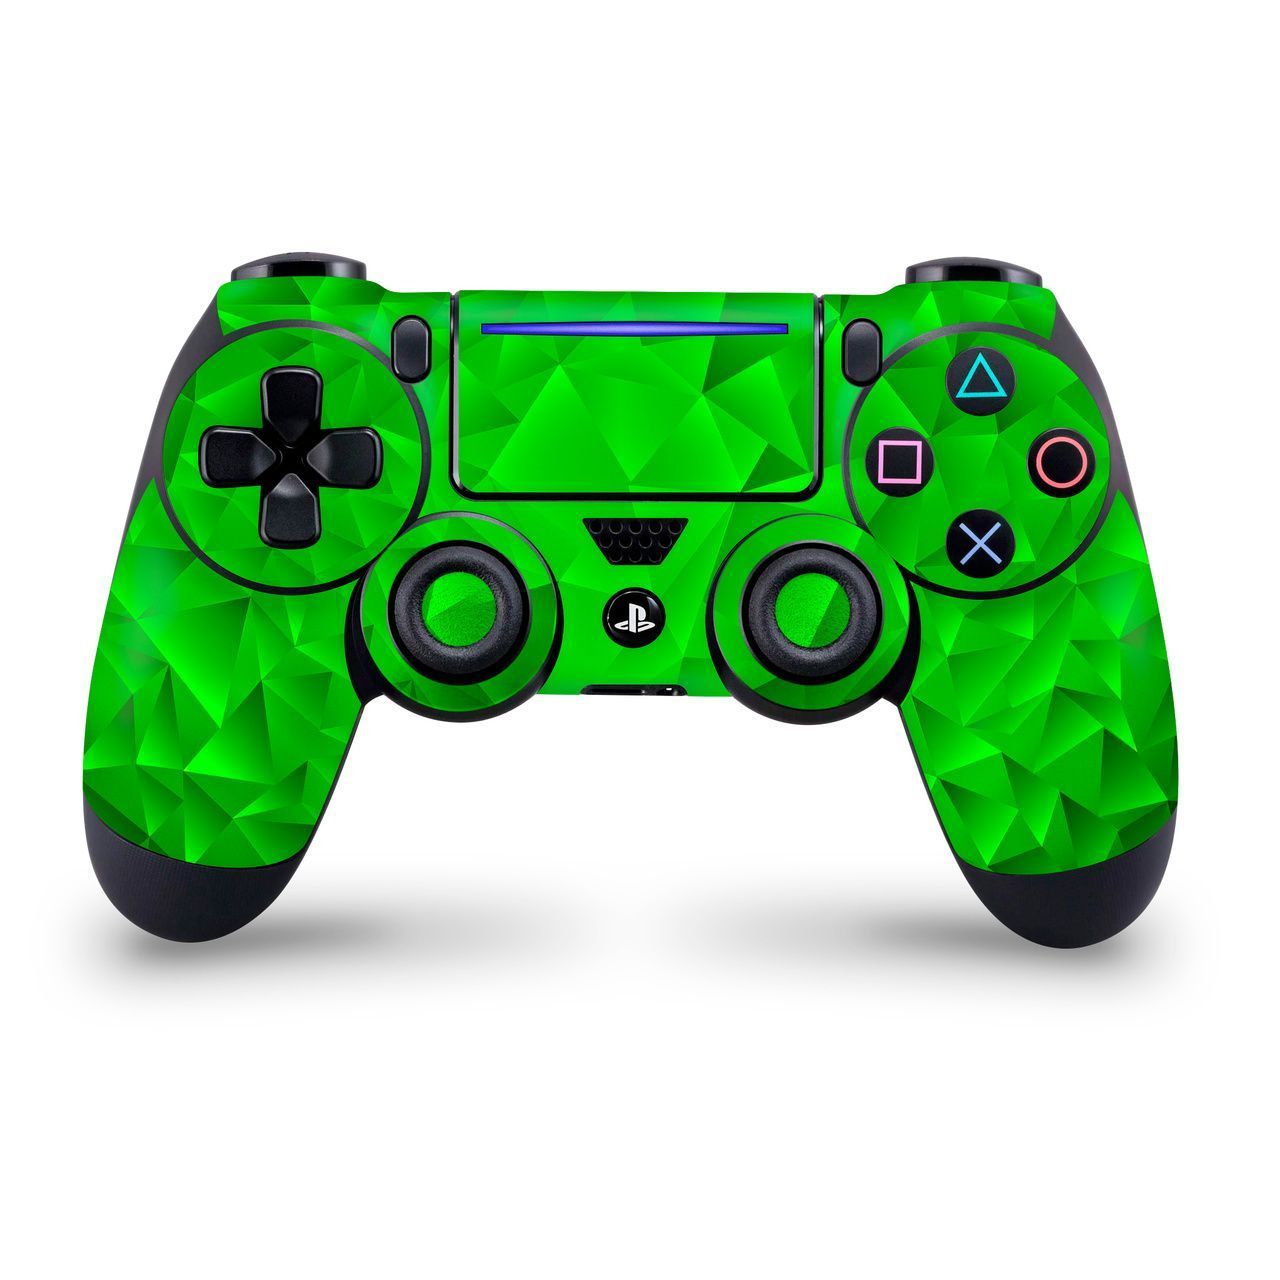 Green PS4 Controller Wallpaper Free Green PS4 Controller Background